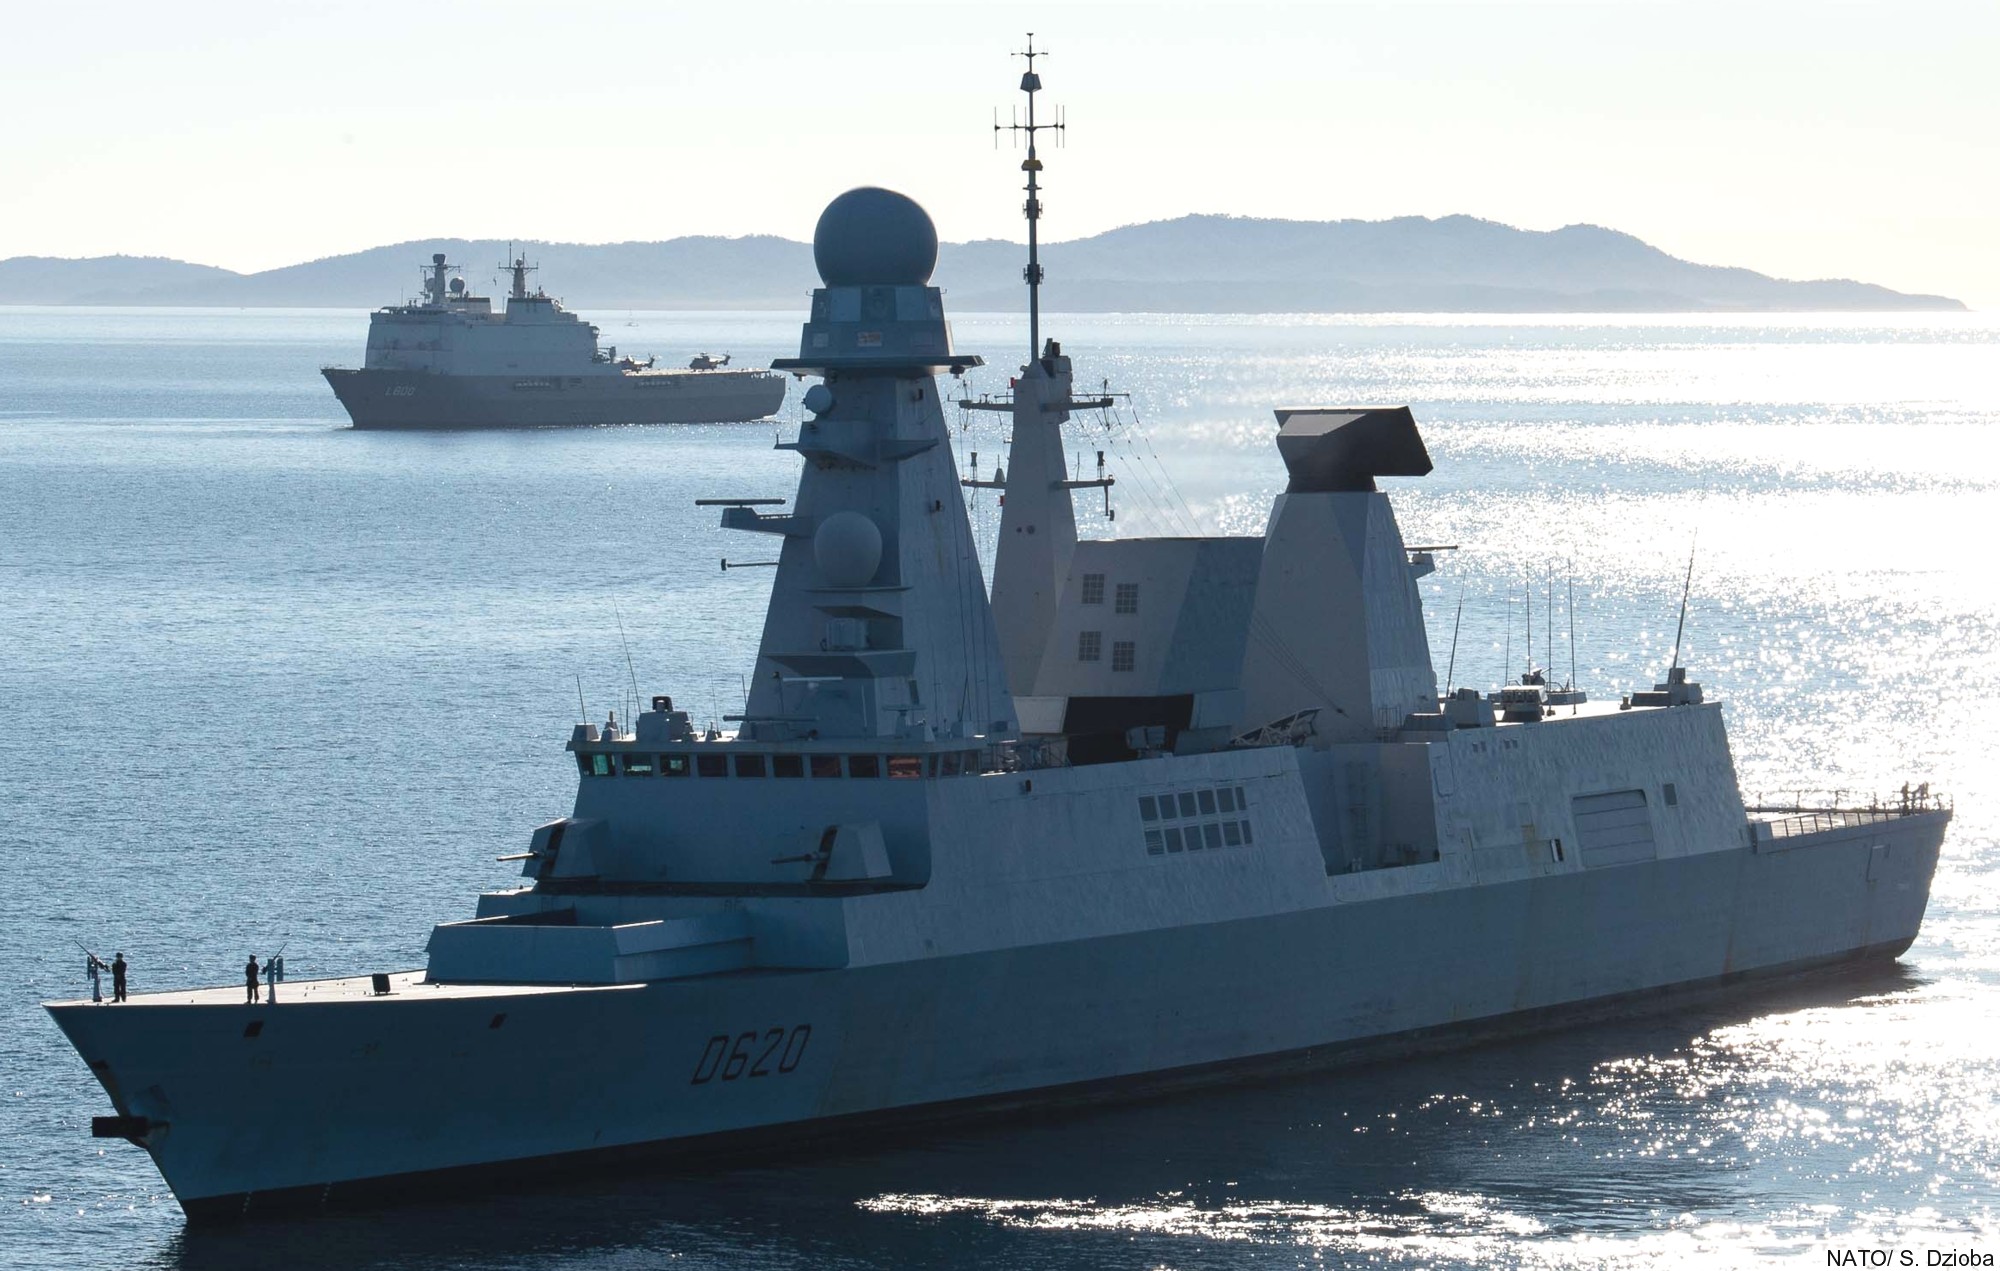 d-620 fs forbin horizon class guided missile frigate fregate anti-air-warfare aaw french navy marine nationale 19